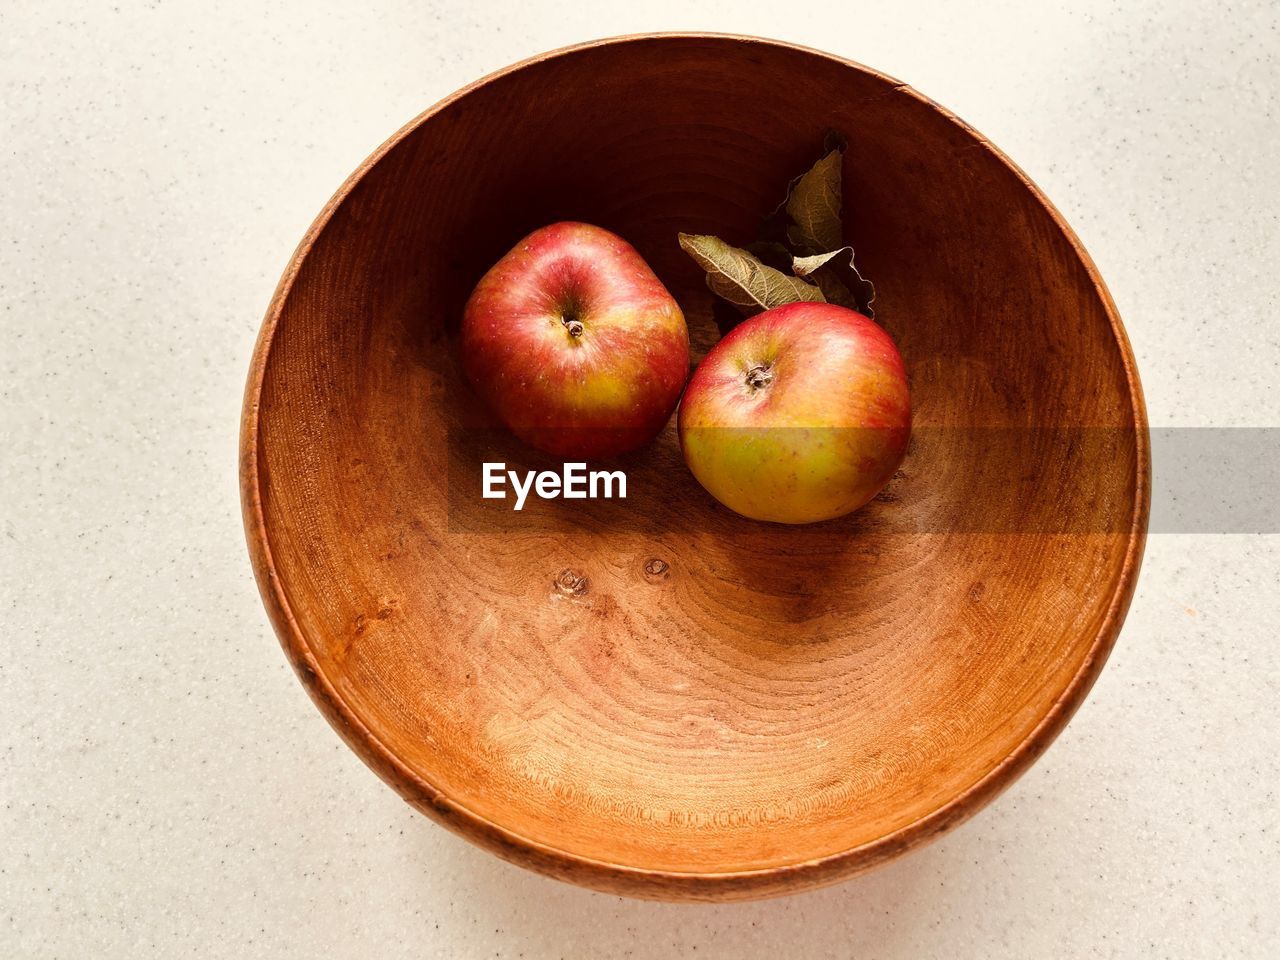 Two apples in wooden bowl. red and green apples. foraged in community orchard. fresh and juicy.